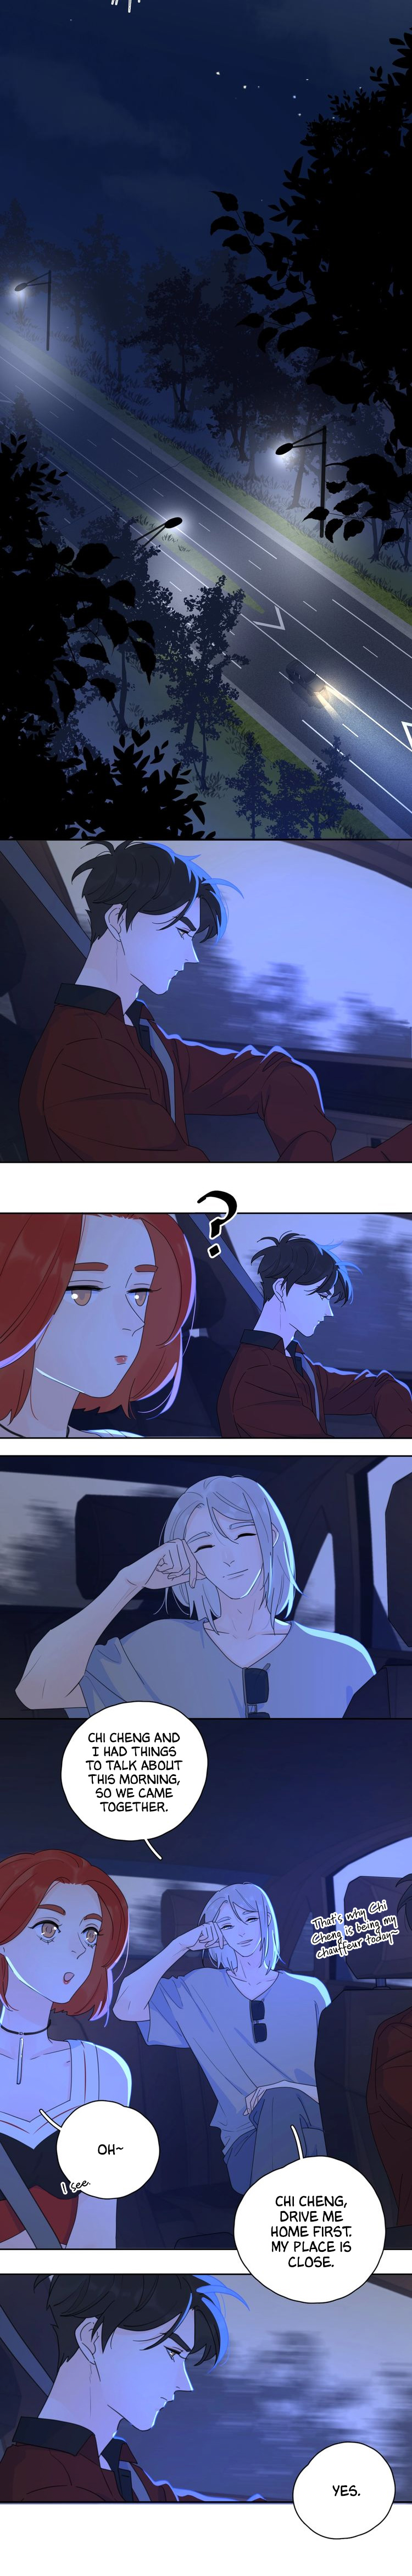 The Looks Of Love: The Heart Has Its Reasons - Page 2